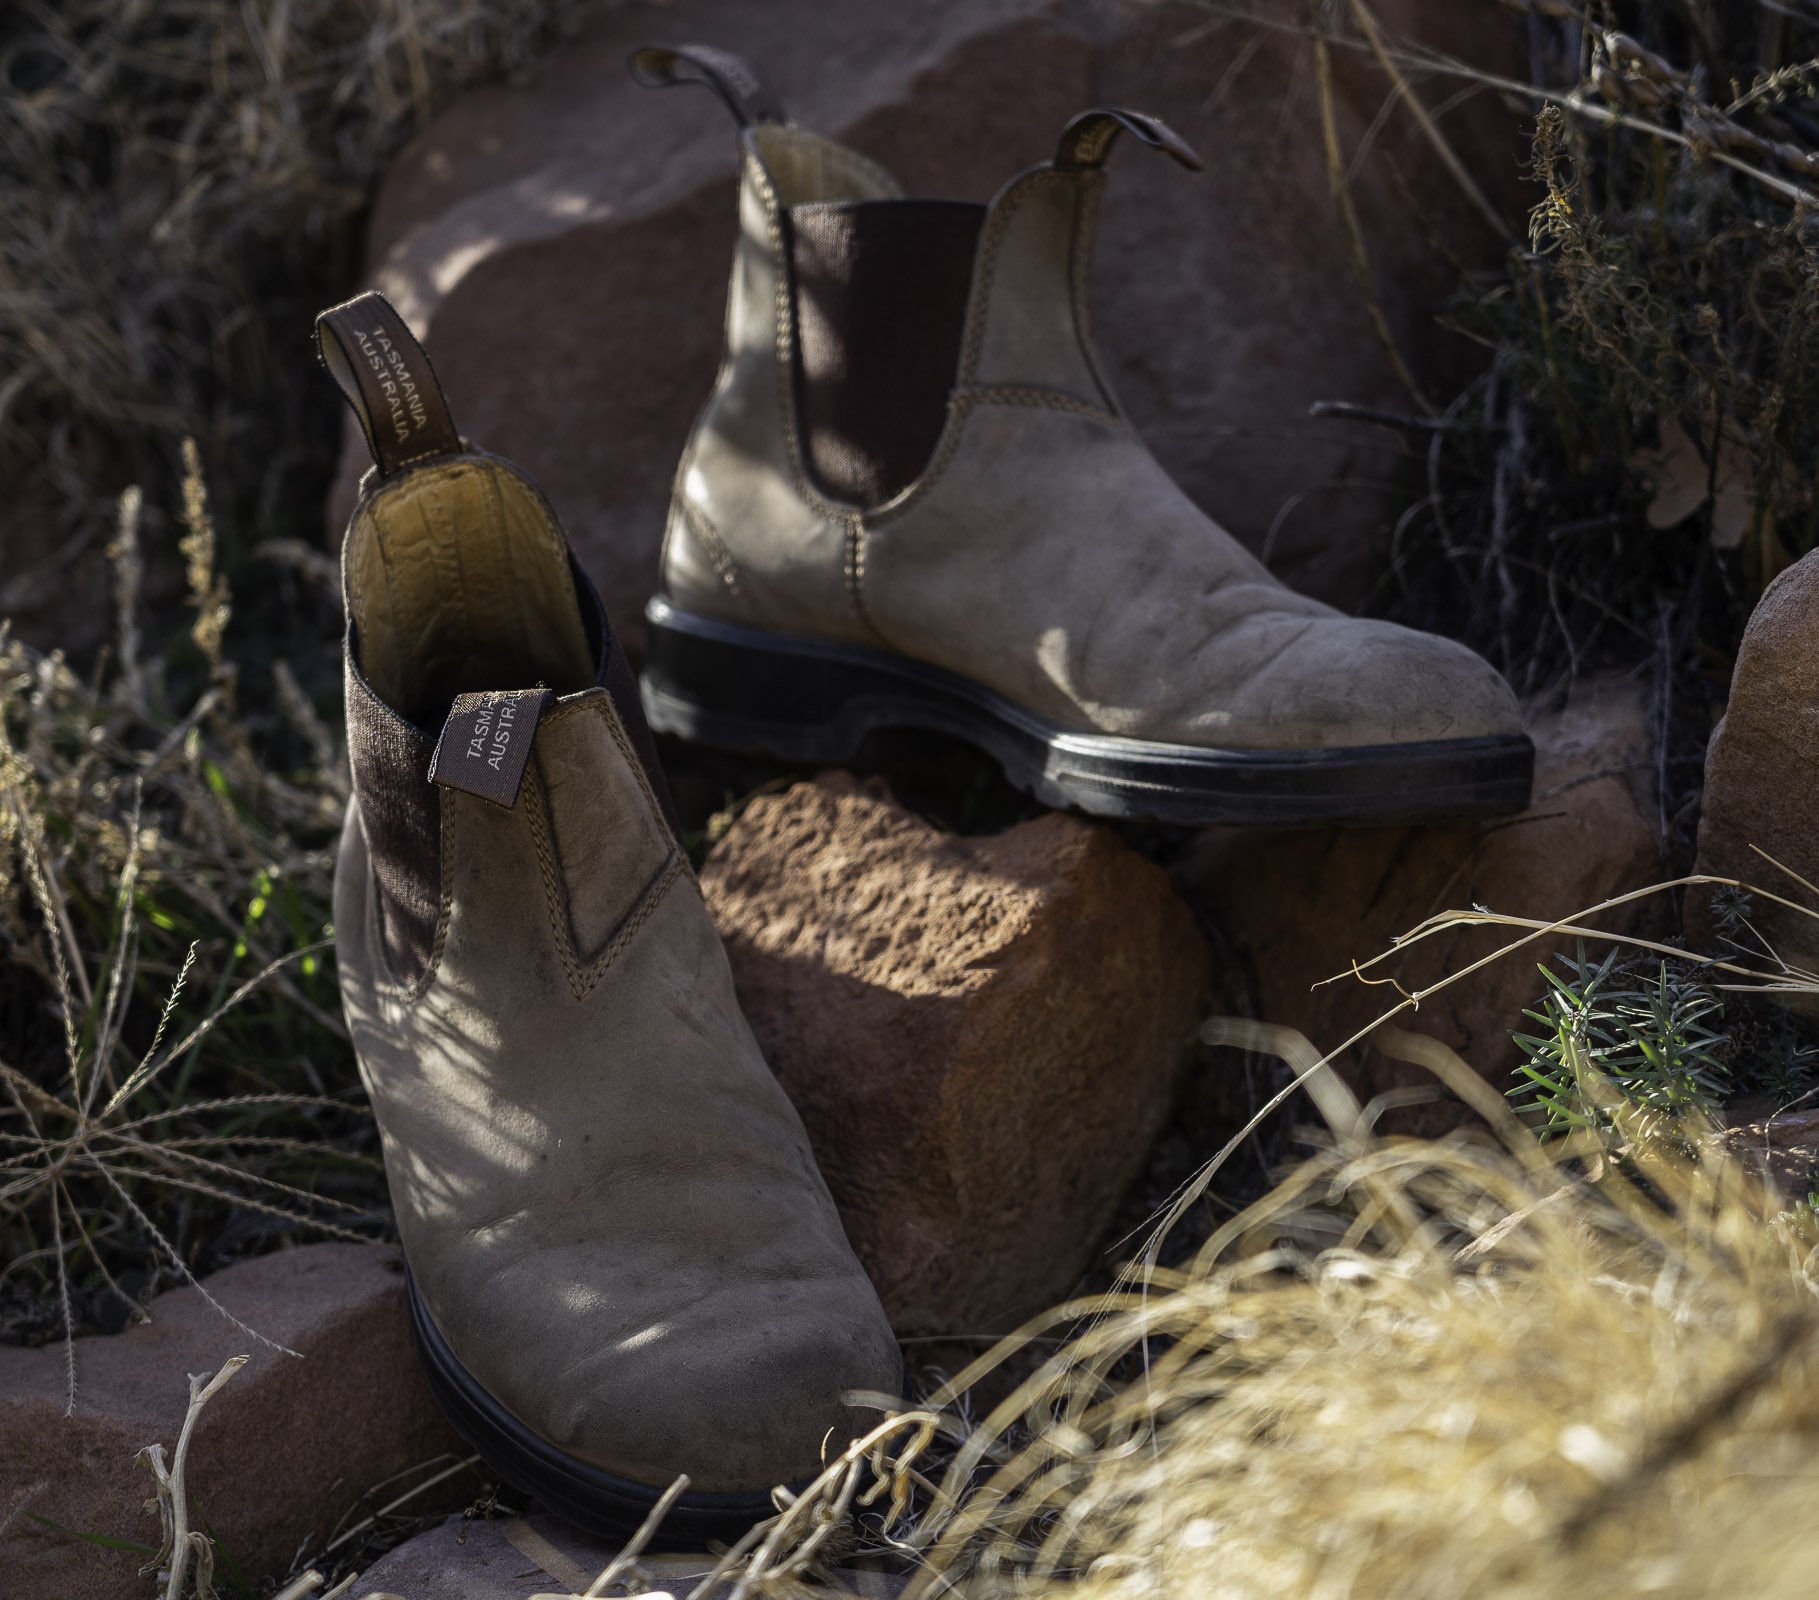 Blundstone 585 Boots 